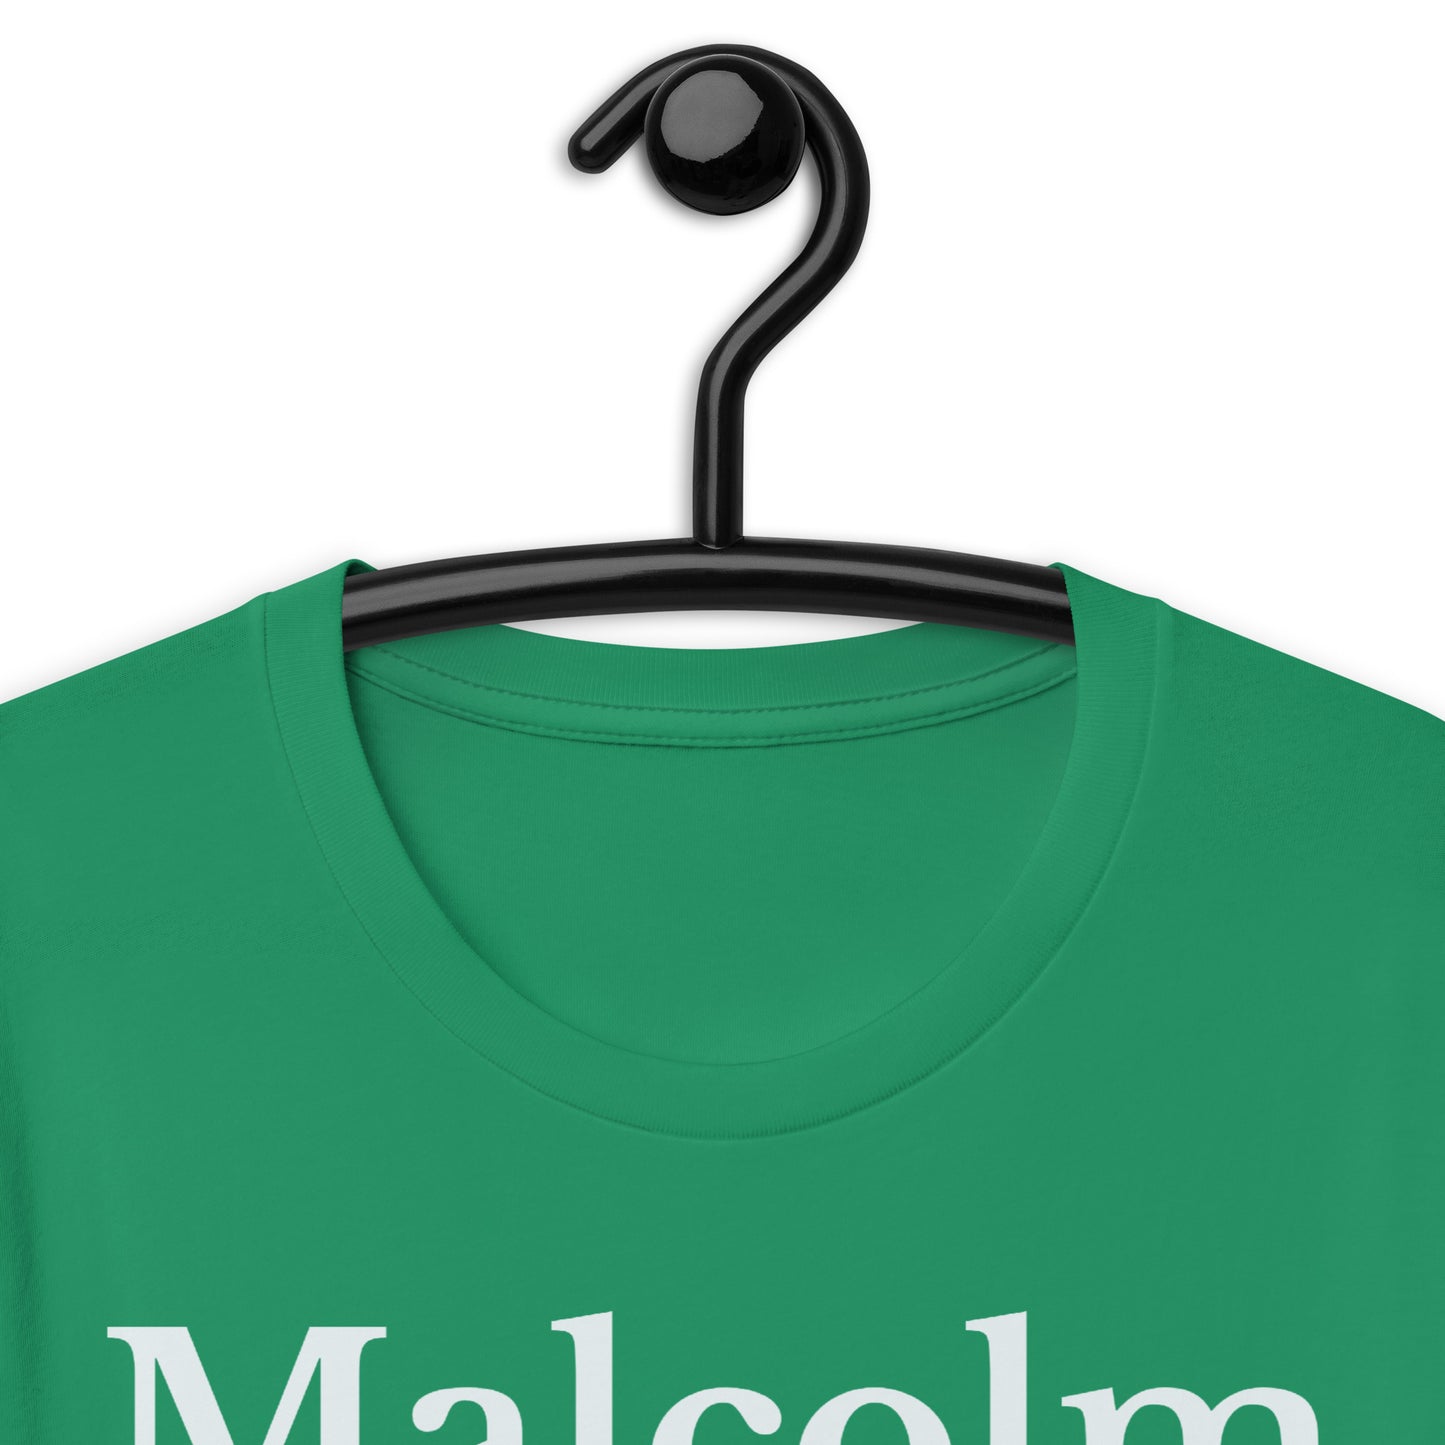 Malcolm was Right T-Shirt